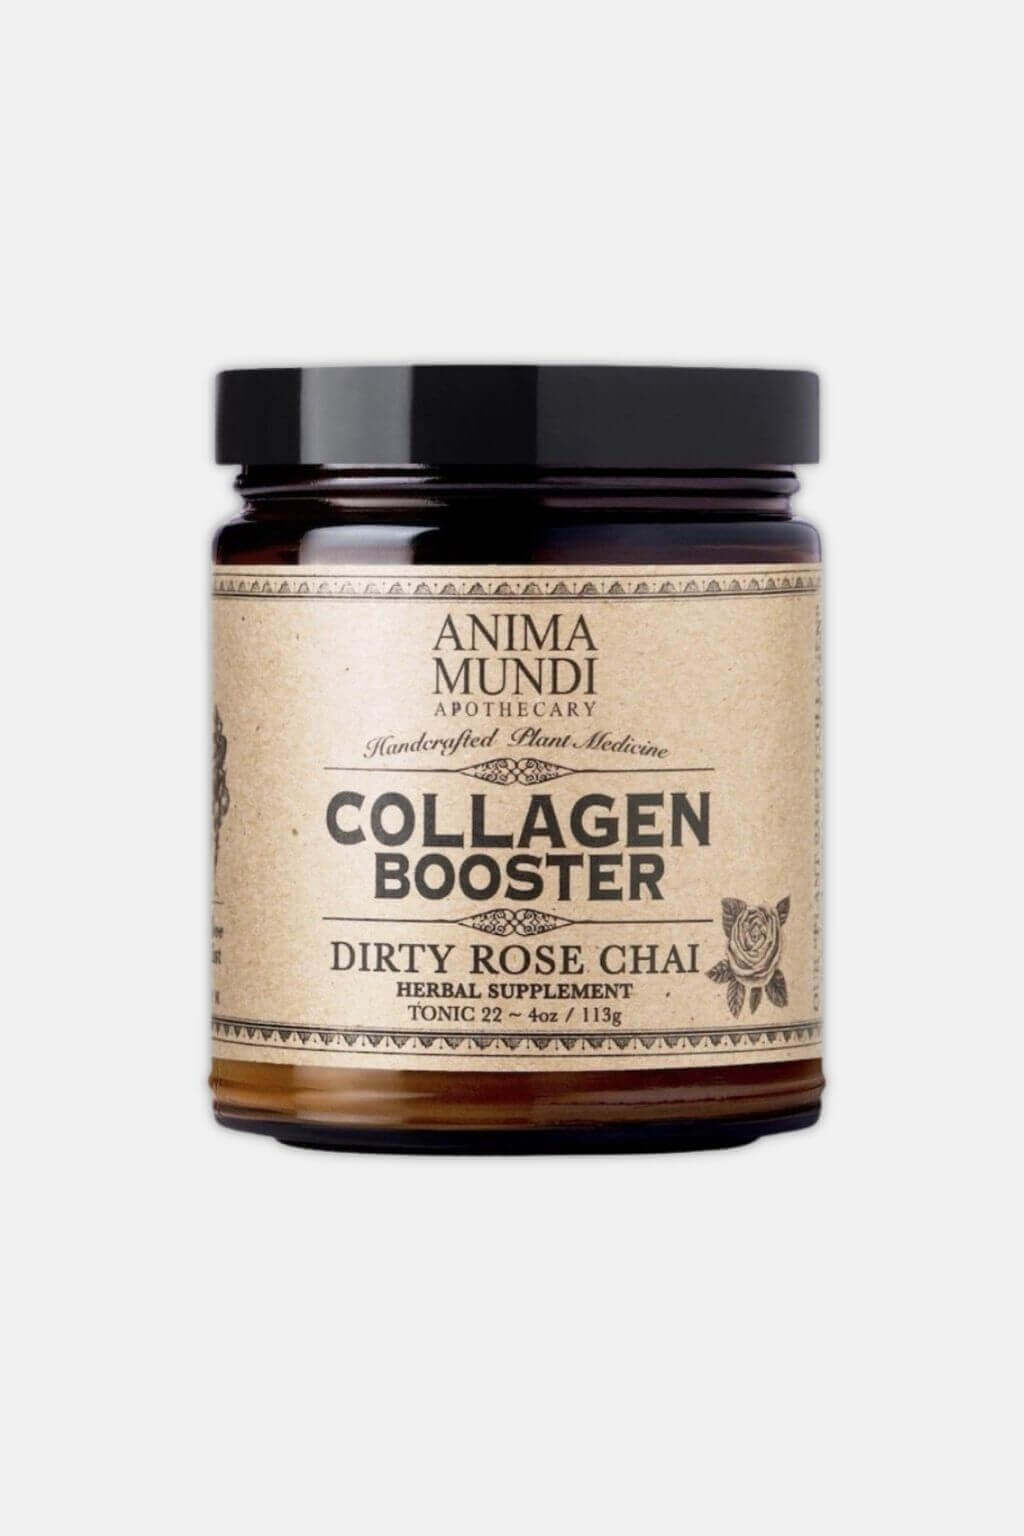 Collagen Booster, Dirty Rose Chai | Plant Based Anima Mundi Apothecary